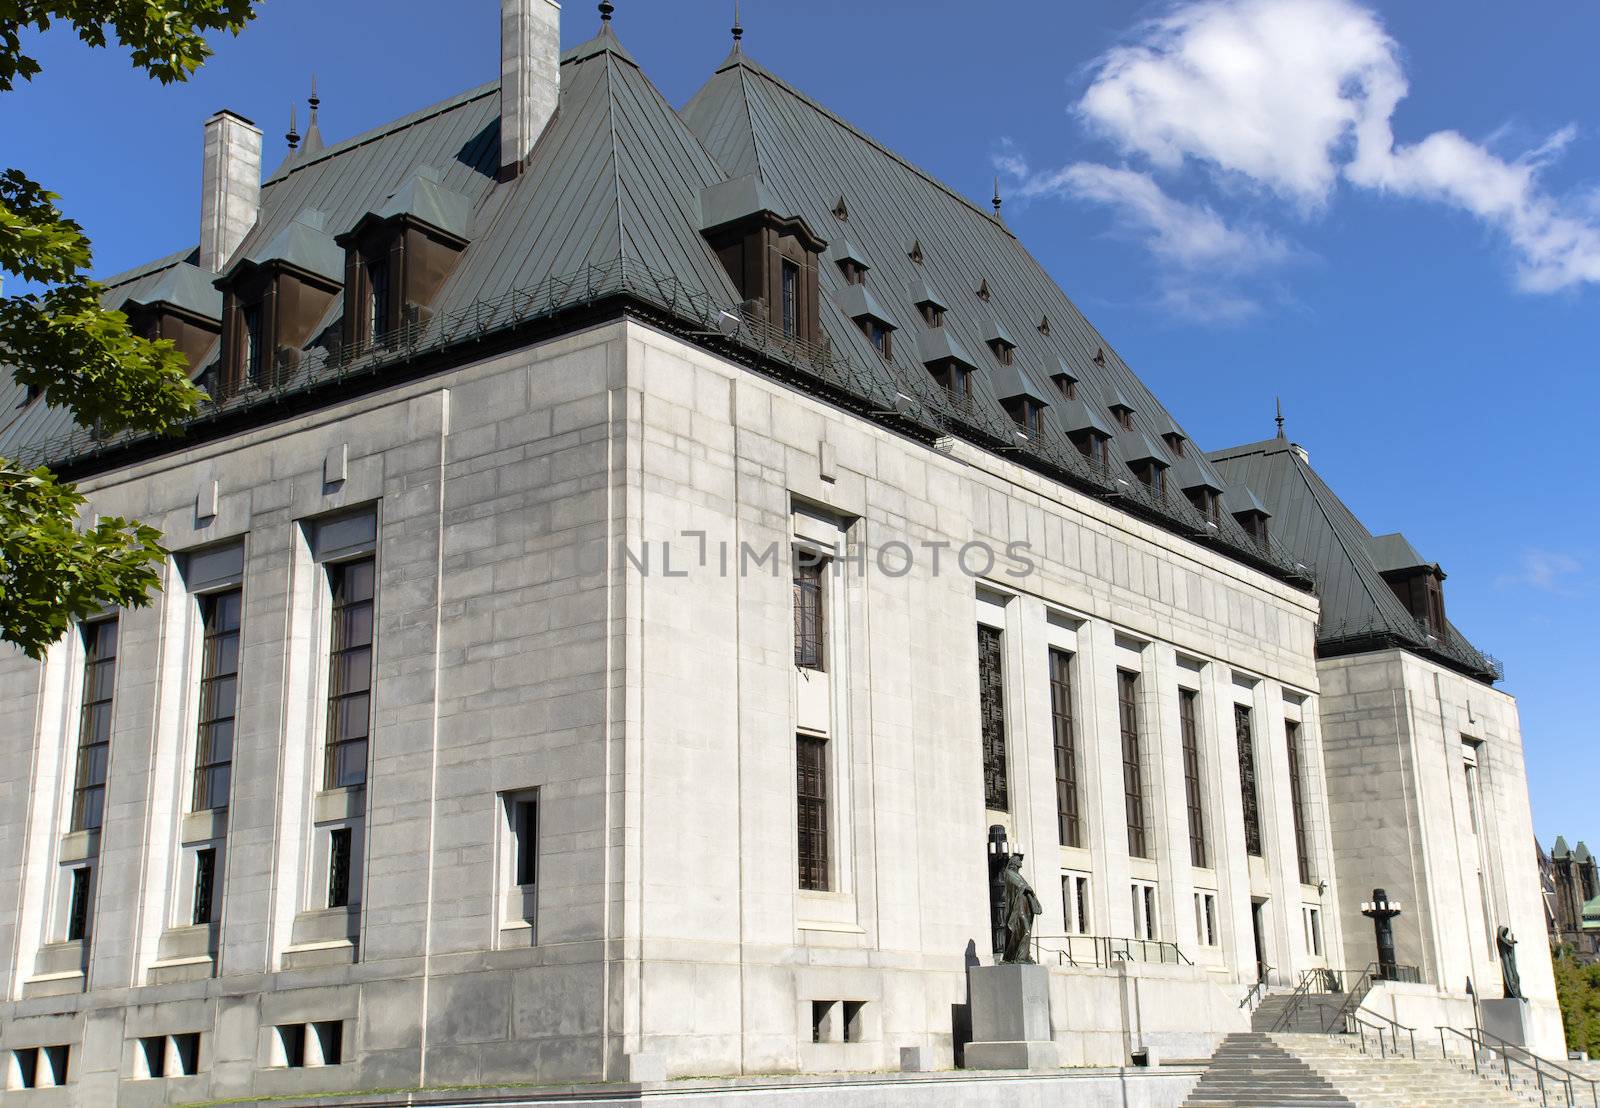 A corner view of the Supreme Court of Canada on Wellington Street in the capital city Ottawa, Canada.